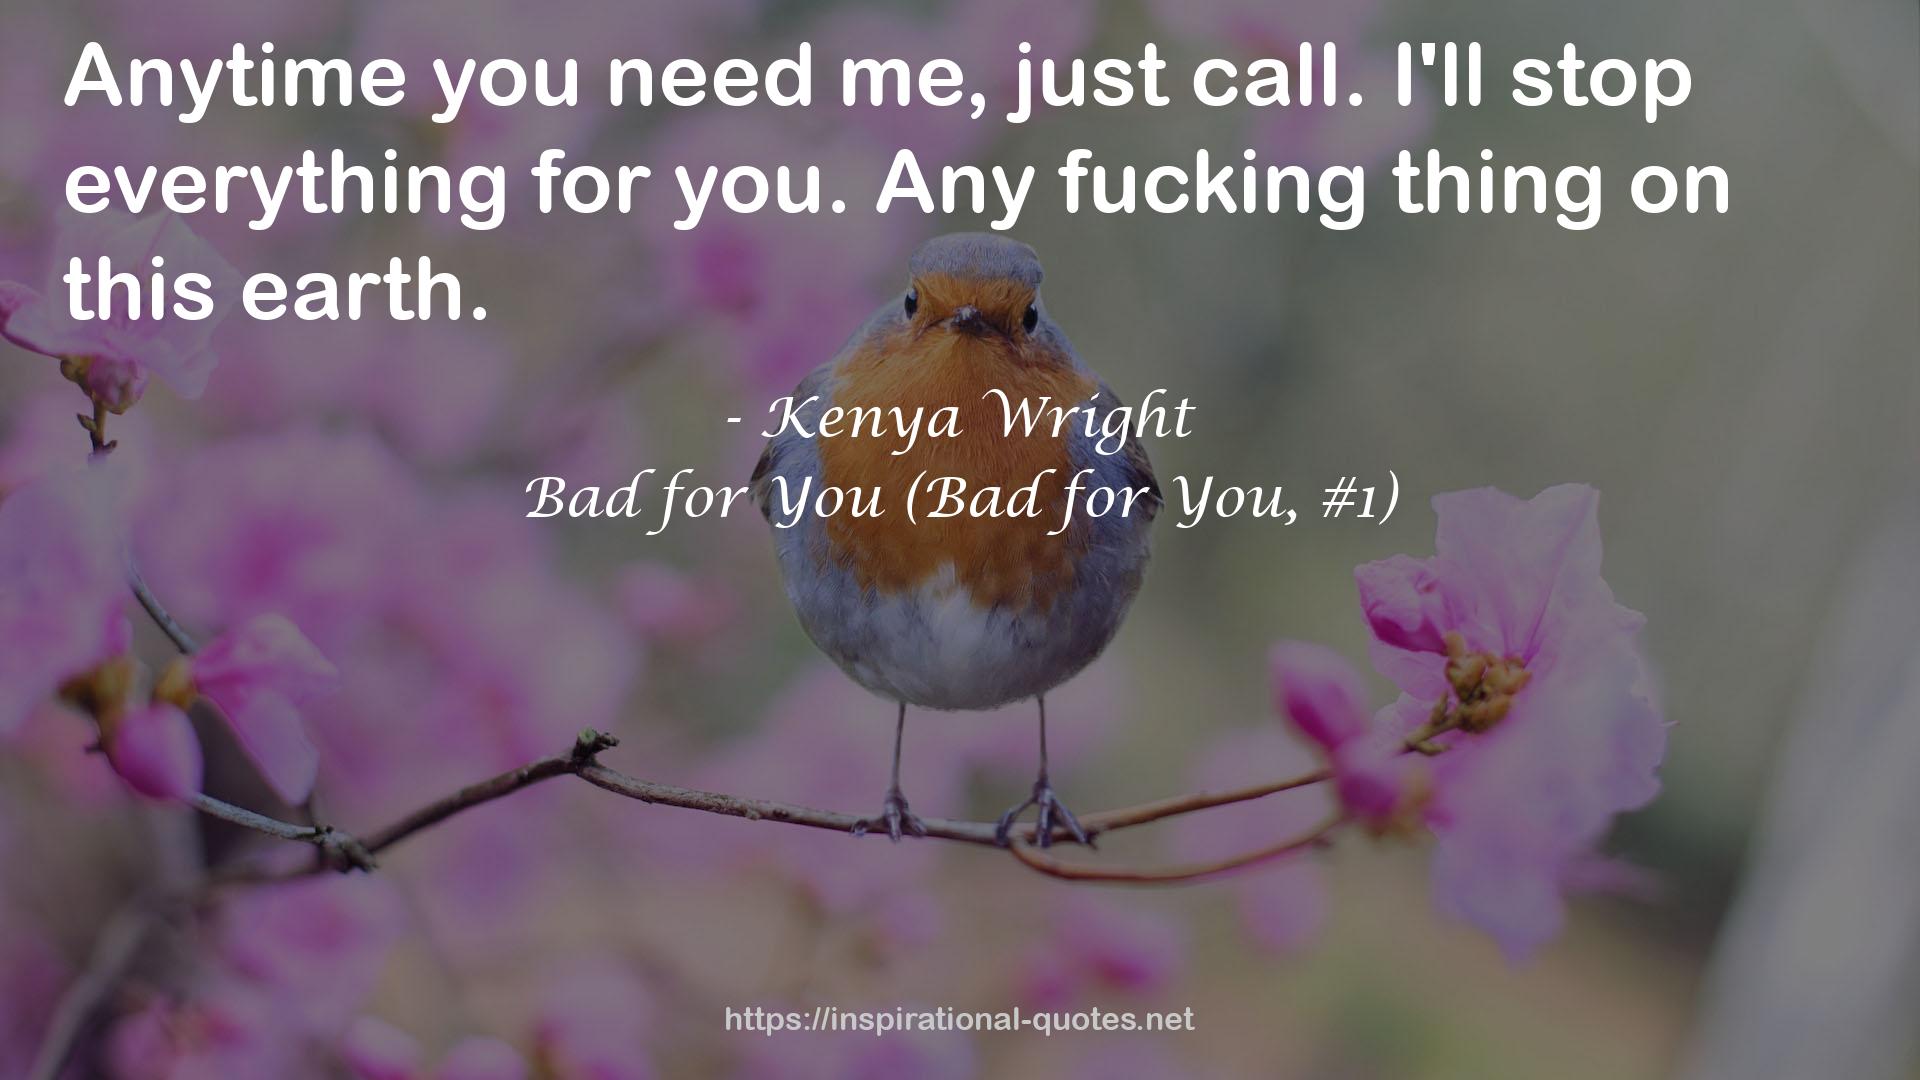 Bad for You (Bad for You, #1) QUOTES